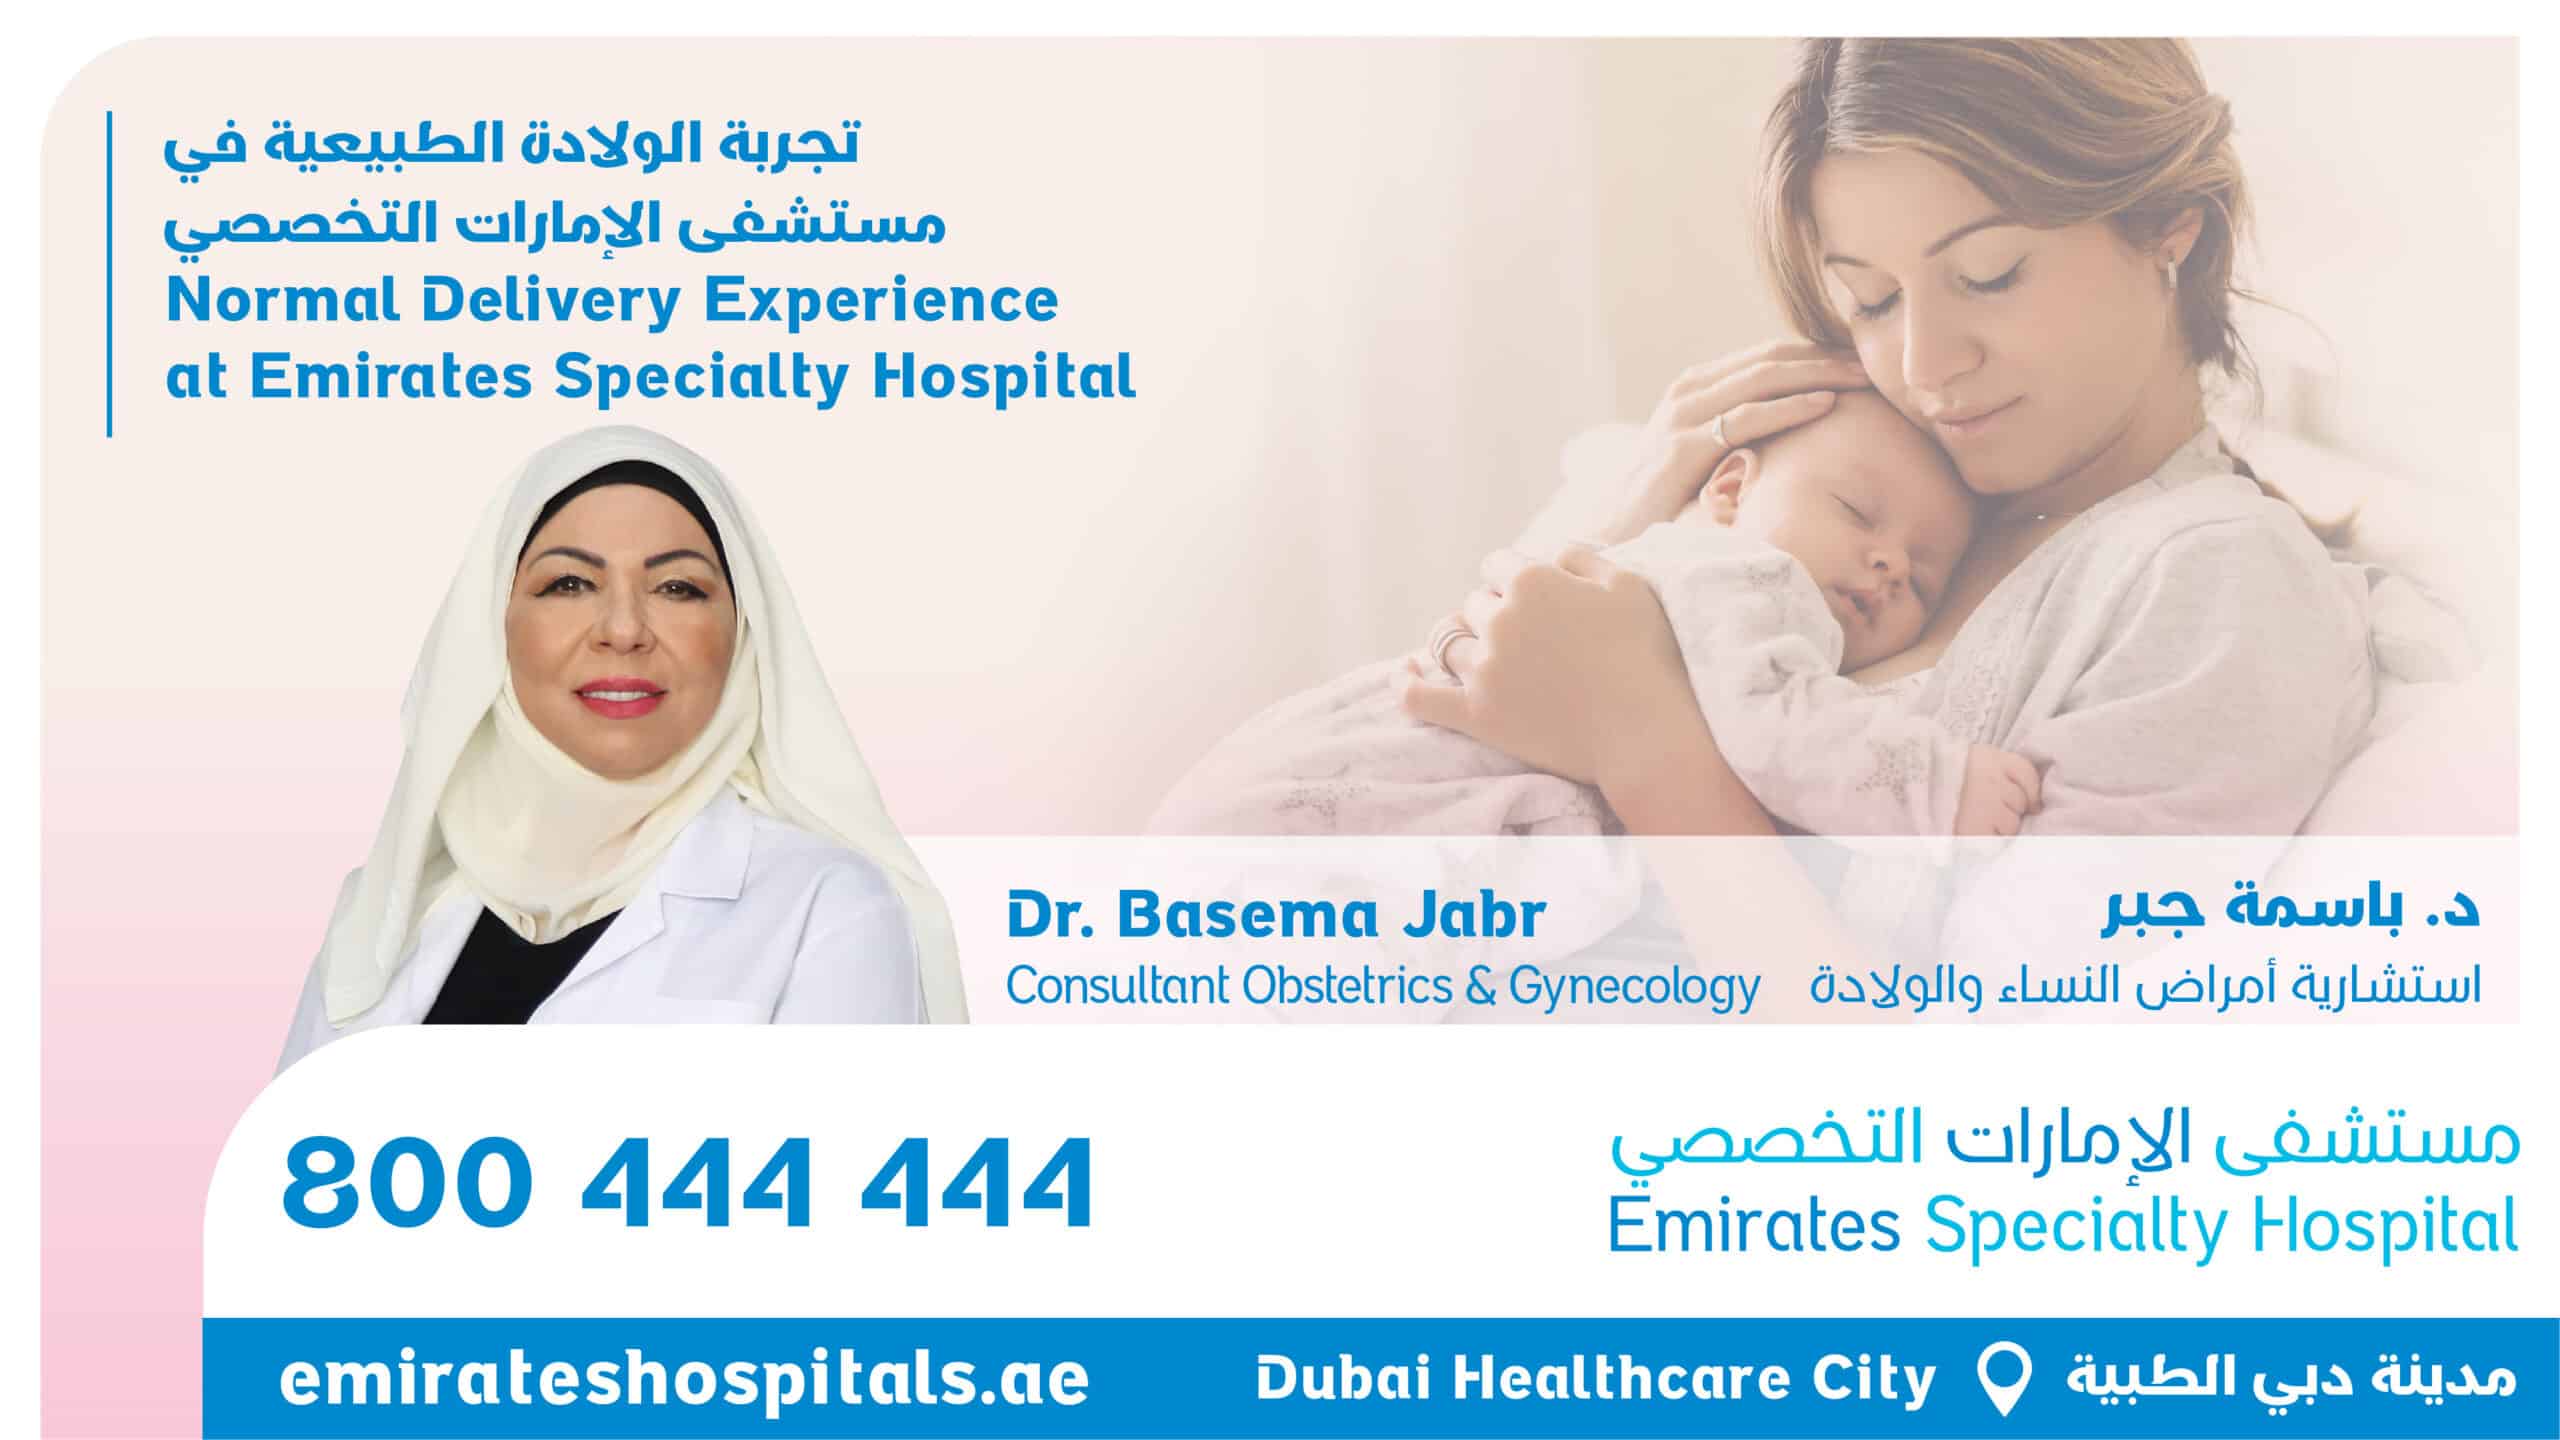 Normal Delivery Experience - Dr Basema Jabr , Consultant Obstetrician & Gynecologist